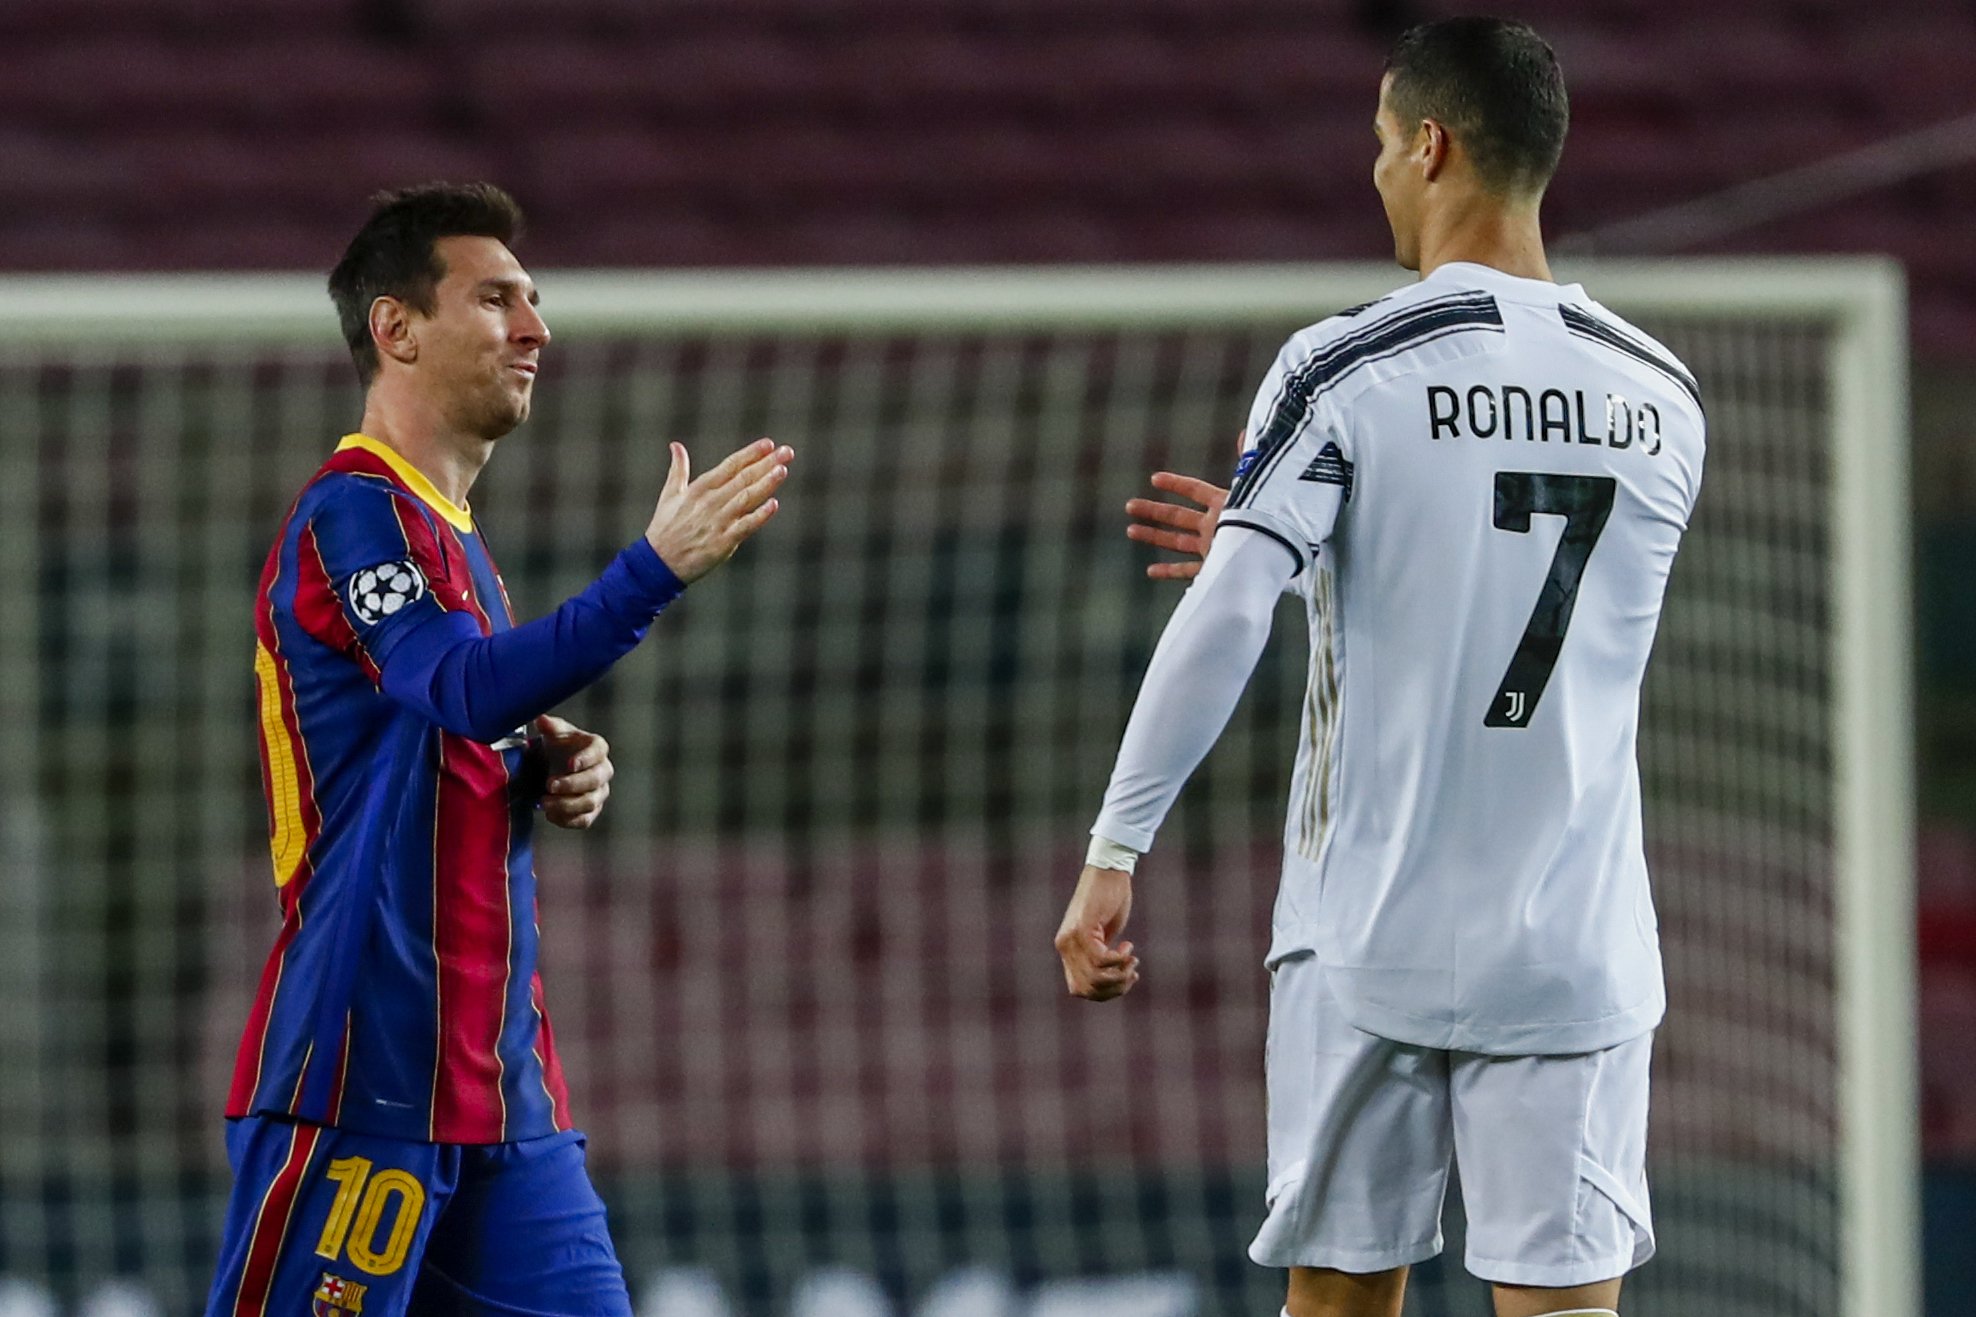 Ronaldo gets better of old rival Messi as Juventus beat Barc